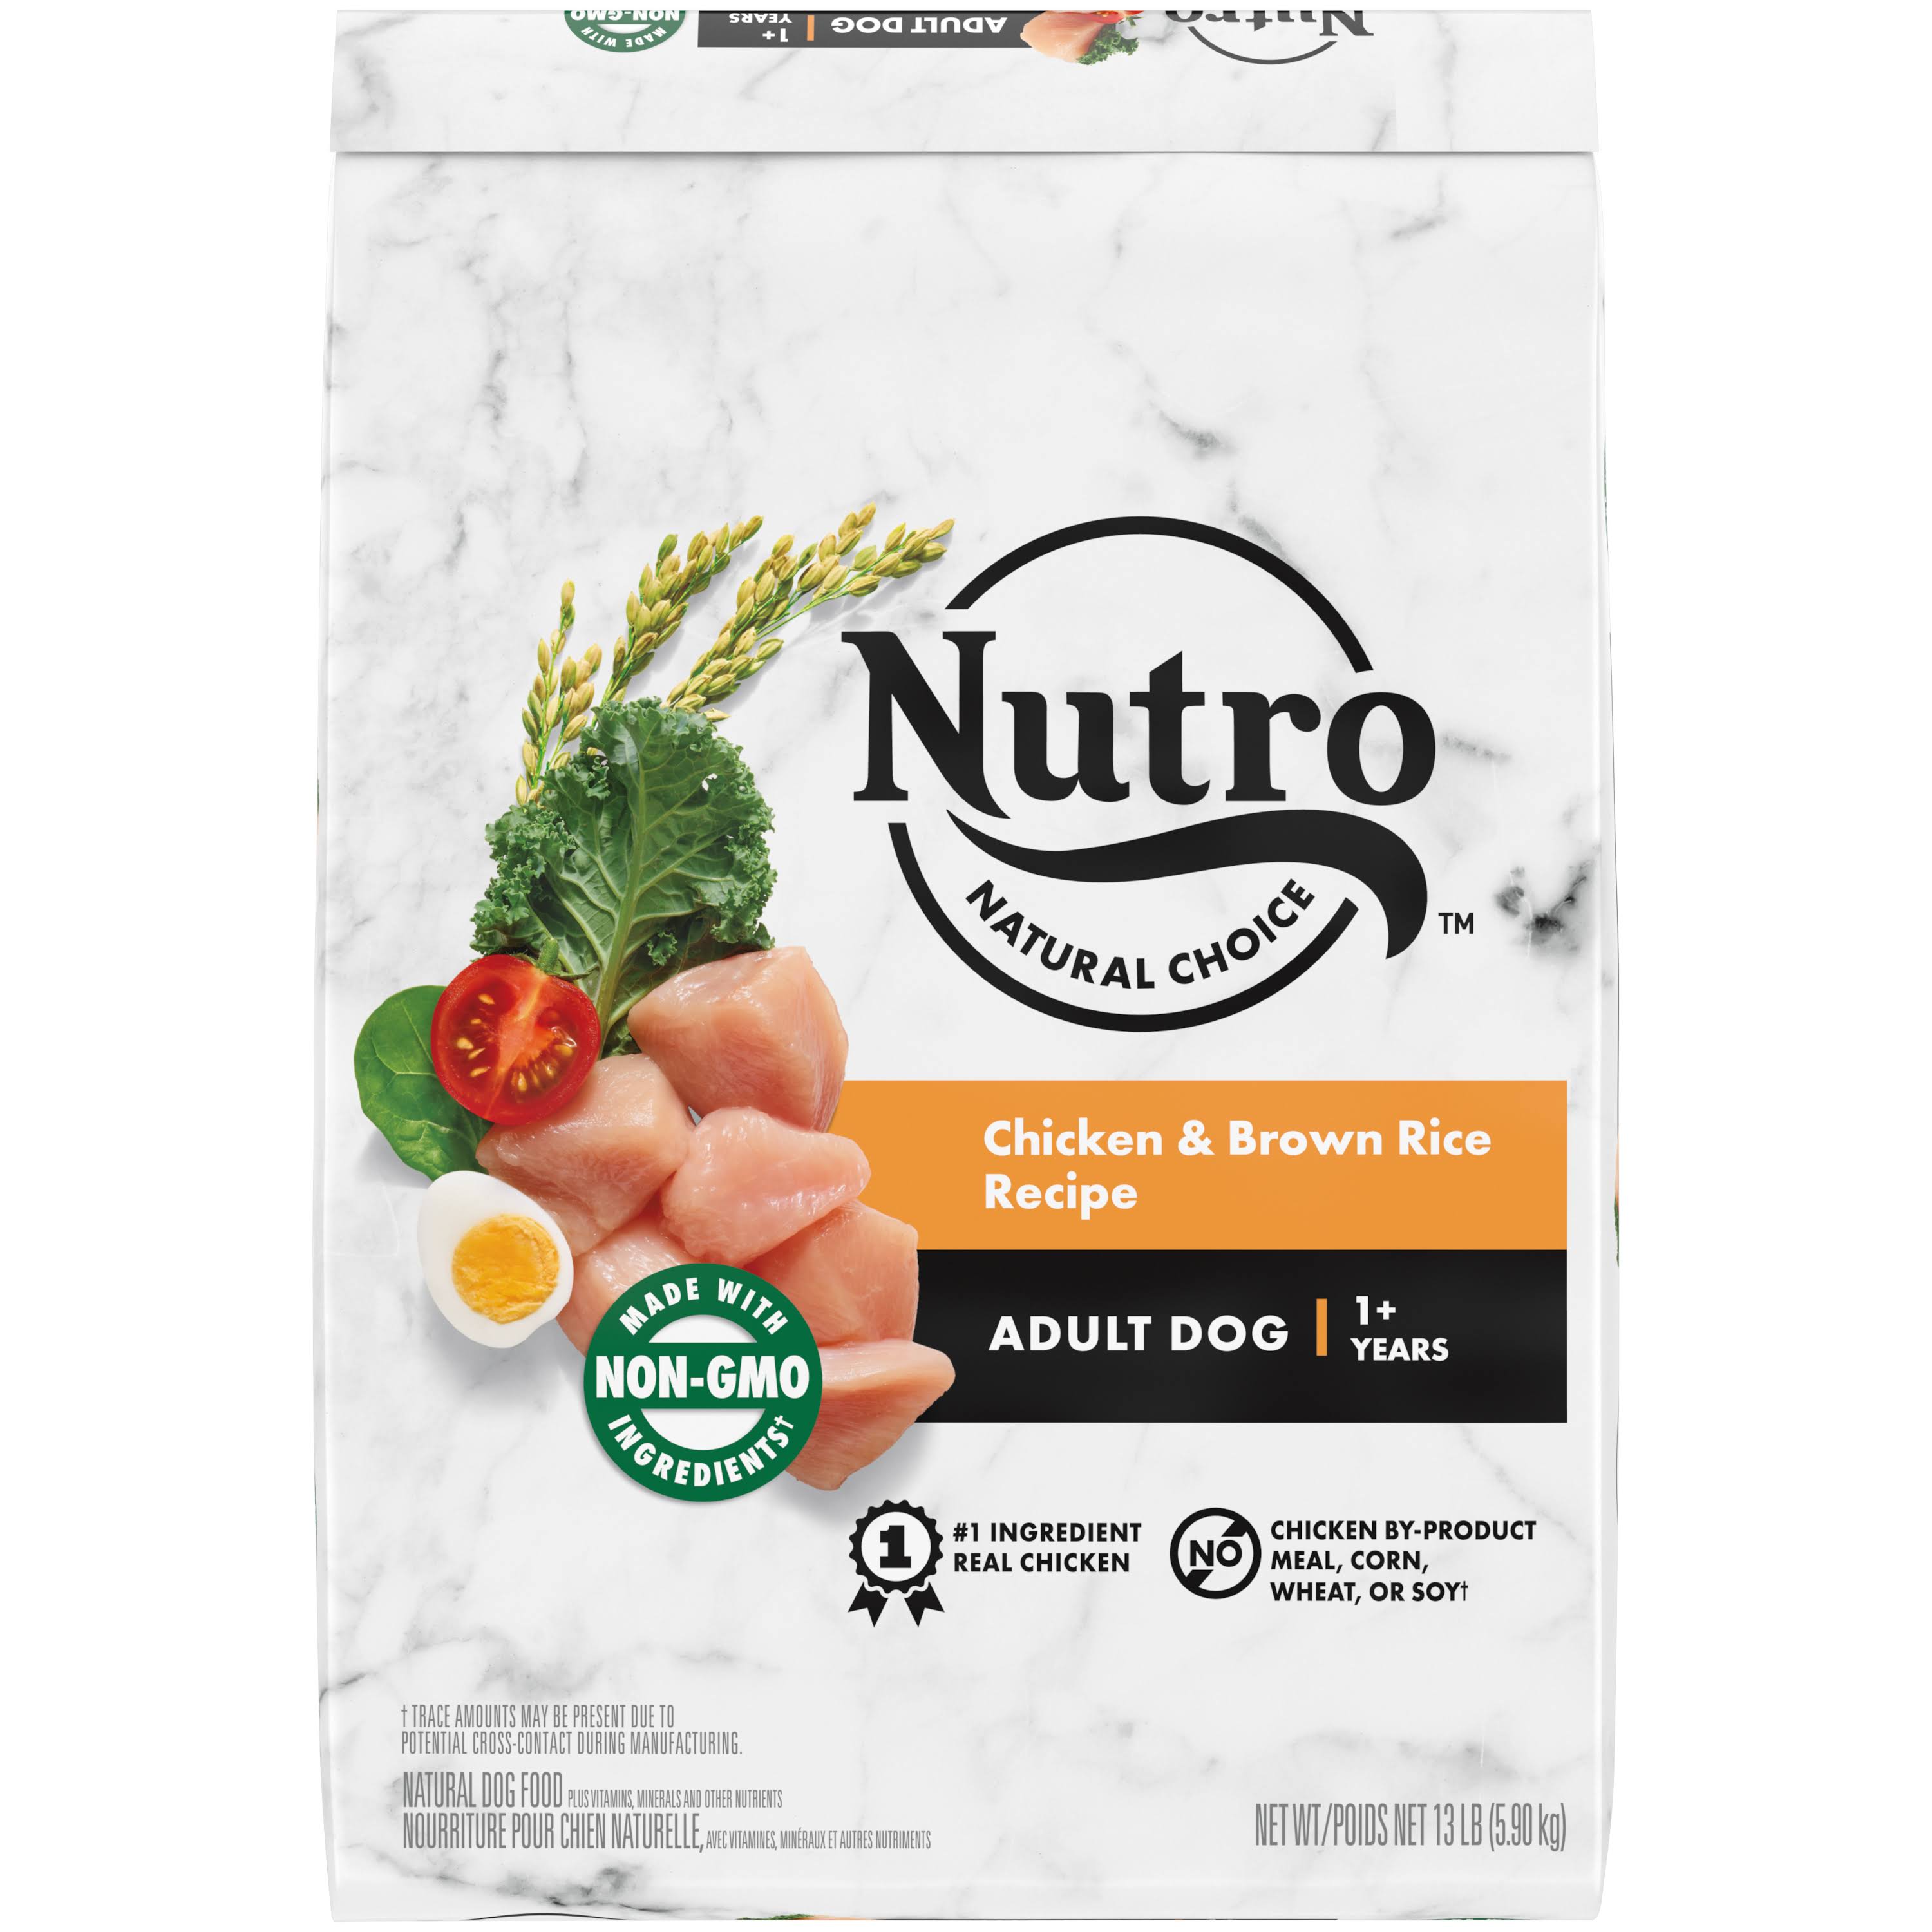 NUTRO Natural Choice Adult Dry Dog Food, Chicken & Brown Rice Recipe Dog Kibble, 13 Lb Bag